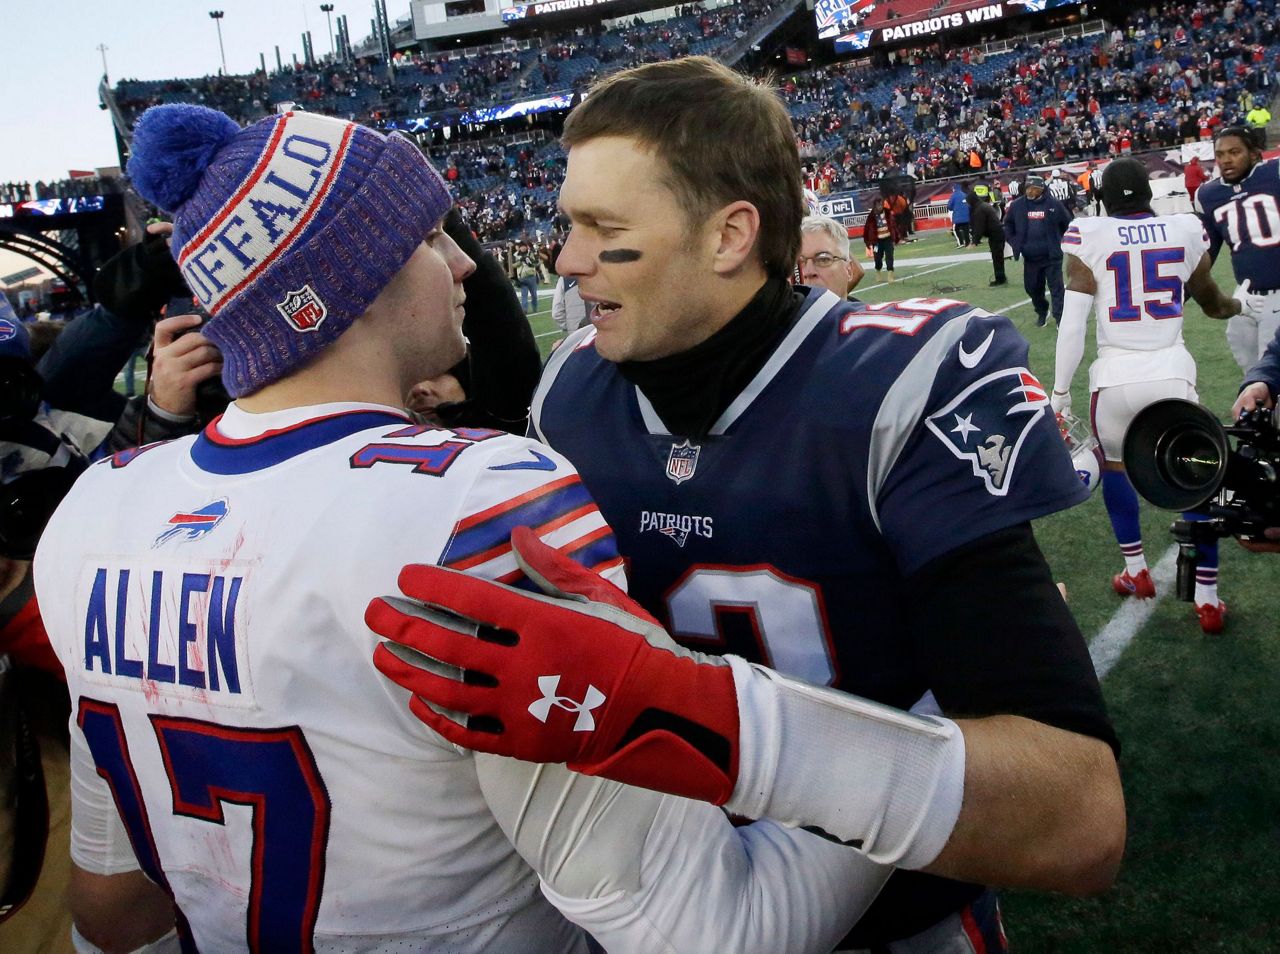 Pats beat Bills 2412, earn 10th straight AFC East title